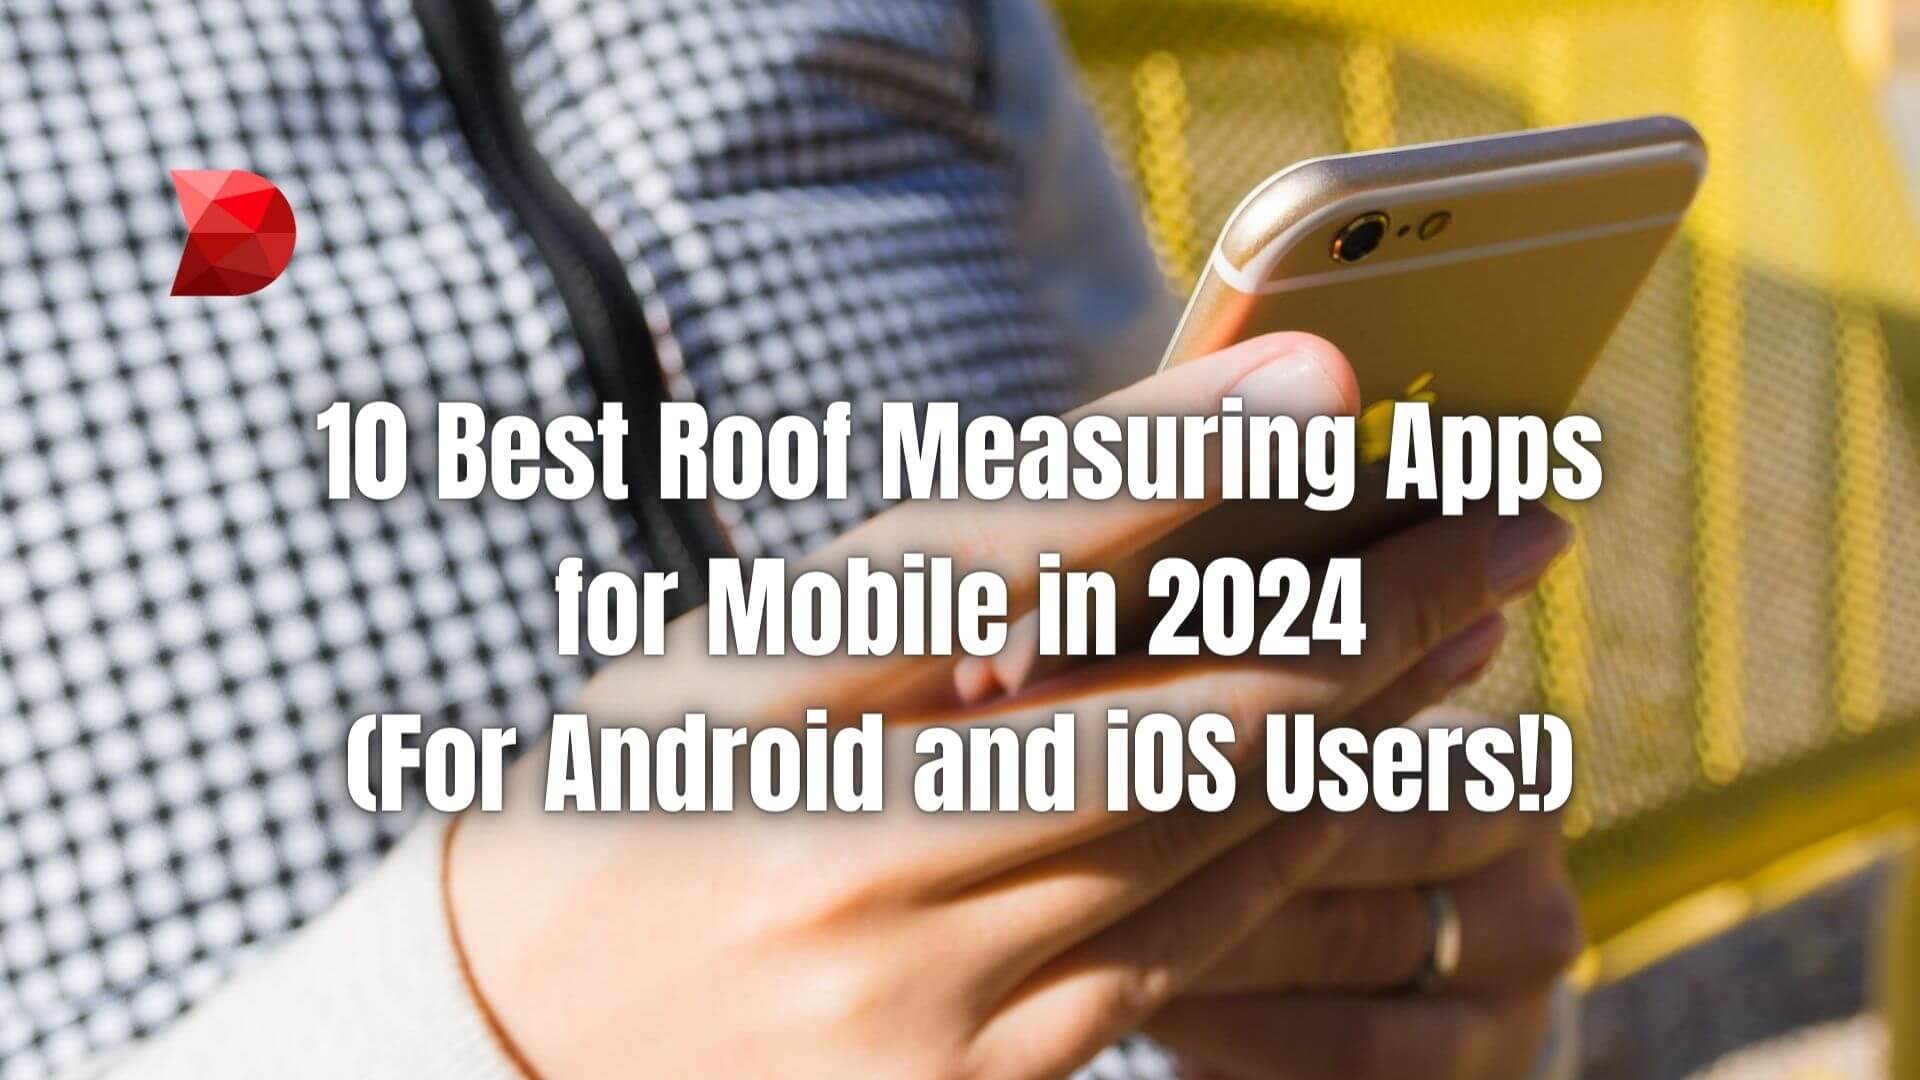 Discover top-rated roof measuring apps! Click here to explore this guide to the 10 best mobile tools for accurate measurements in 2024.